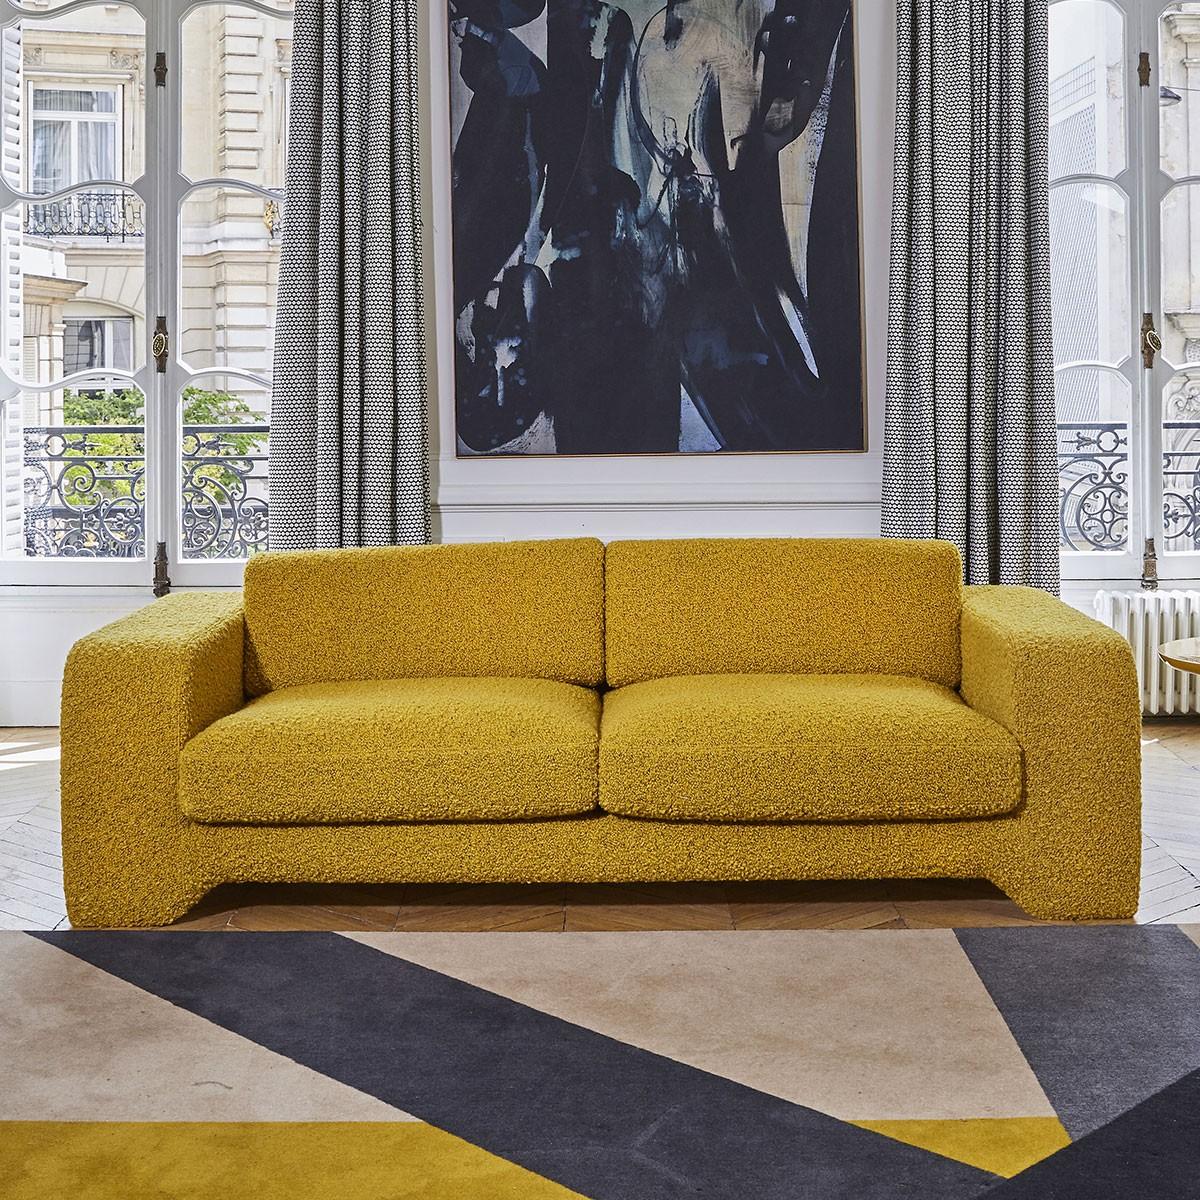 Popus Editions Giovanna 4 seater sofa in Egg Shell Off-White Como Velvet Fabric

Giovanna is a sofa with a strong profile. A sober, plush line, with this famous detail that changes everything, so as not to forget its strength of character and this